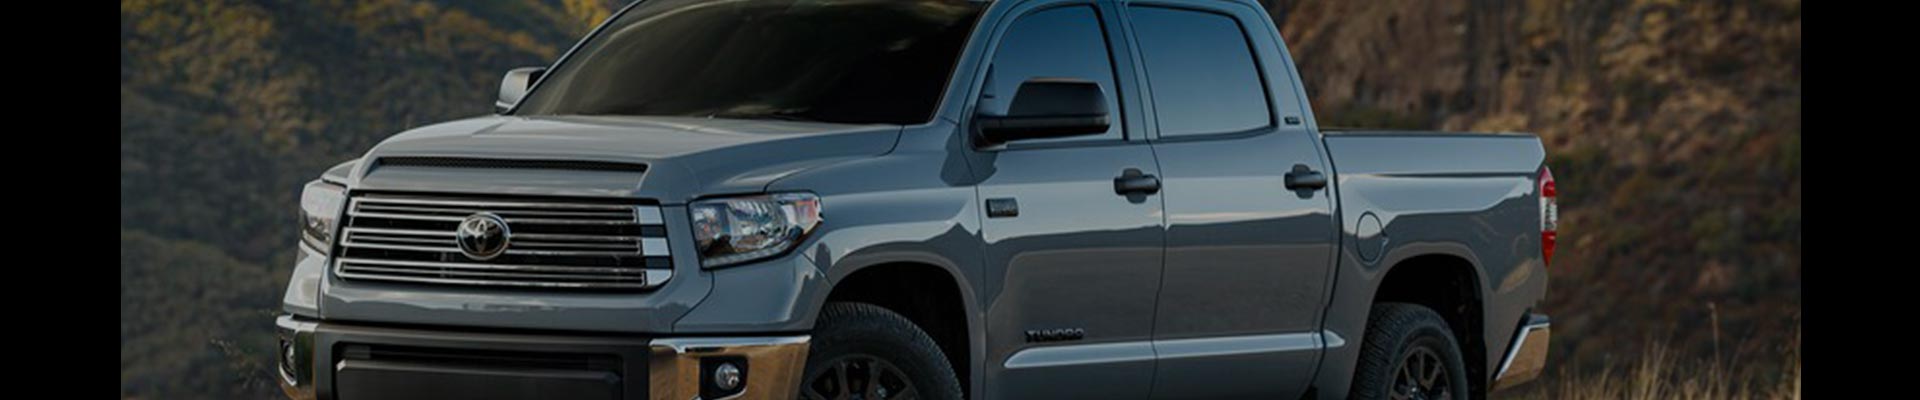 Shop Replacement and OEM 2014 Toyota Tundra Parts with Discounted Price on the Net